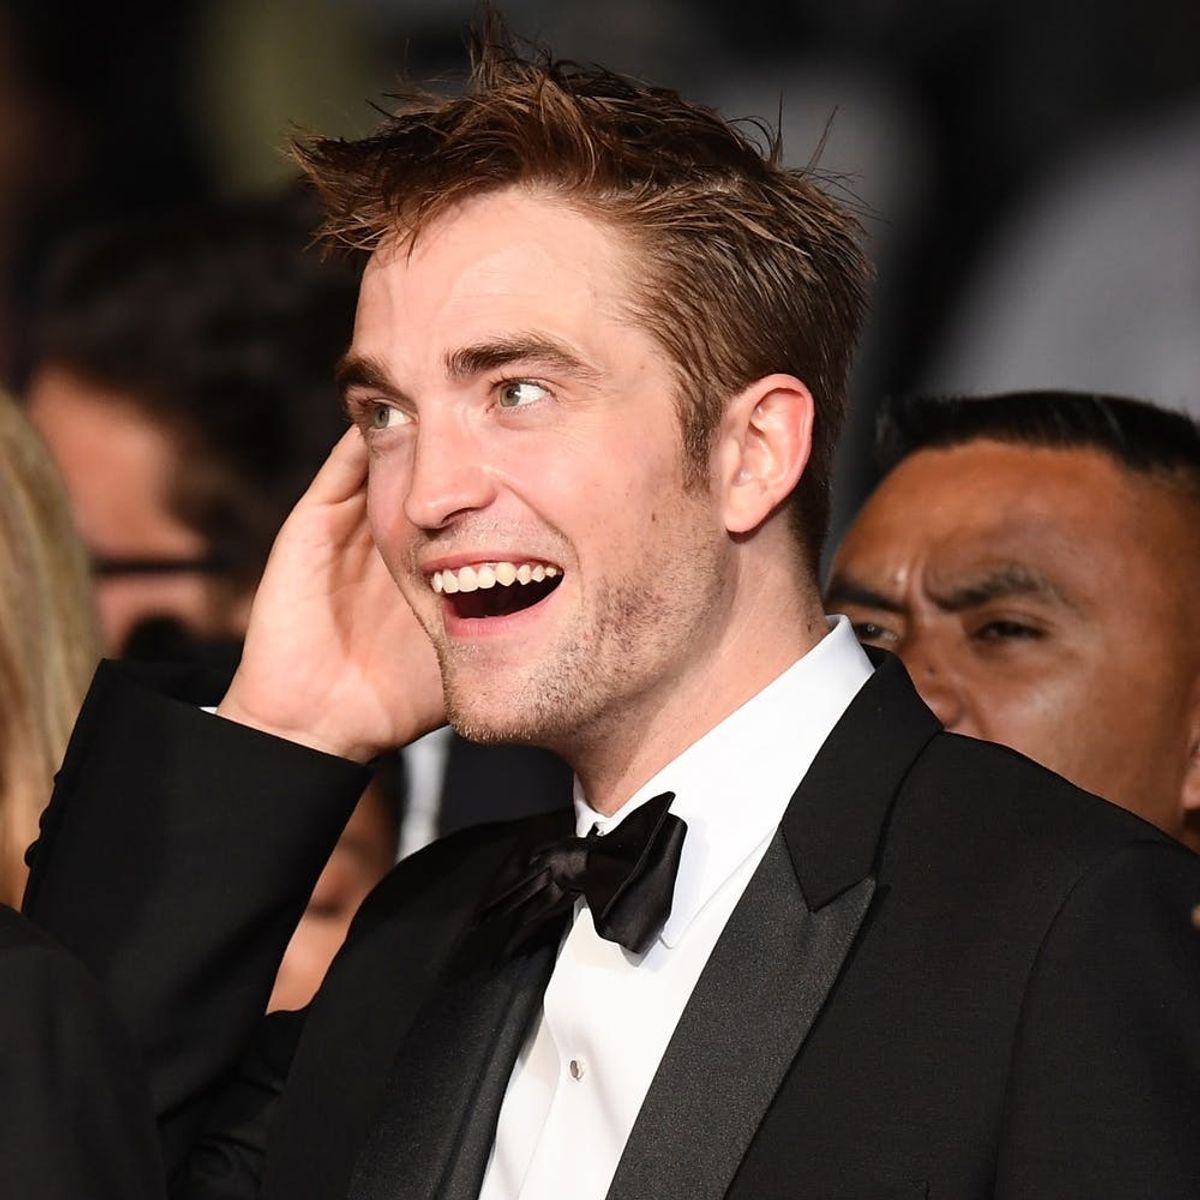 Robert Pattinson Spills the Beans on Why He Was Almost Fired from Twilight